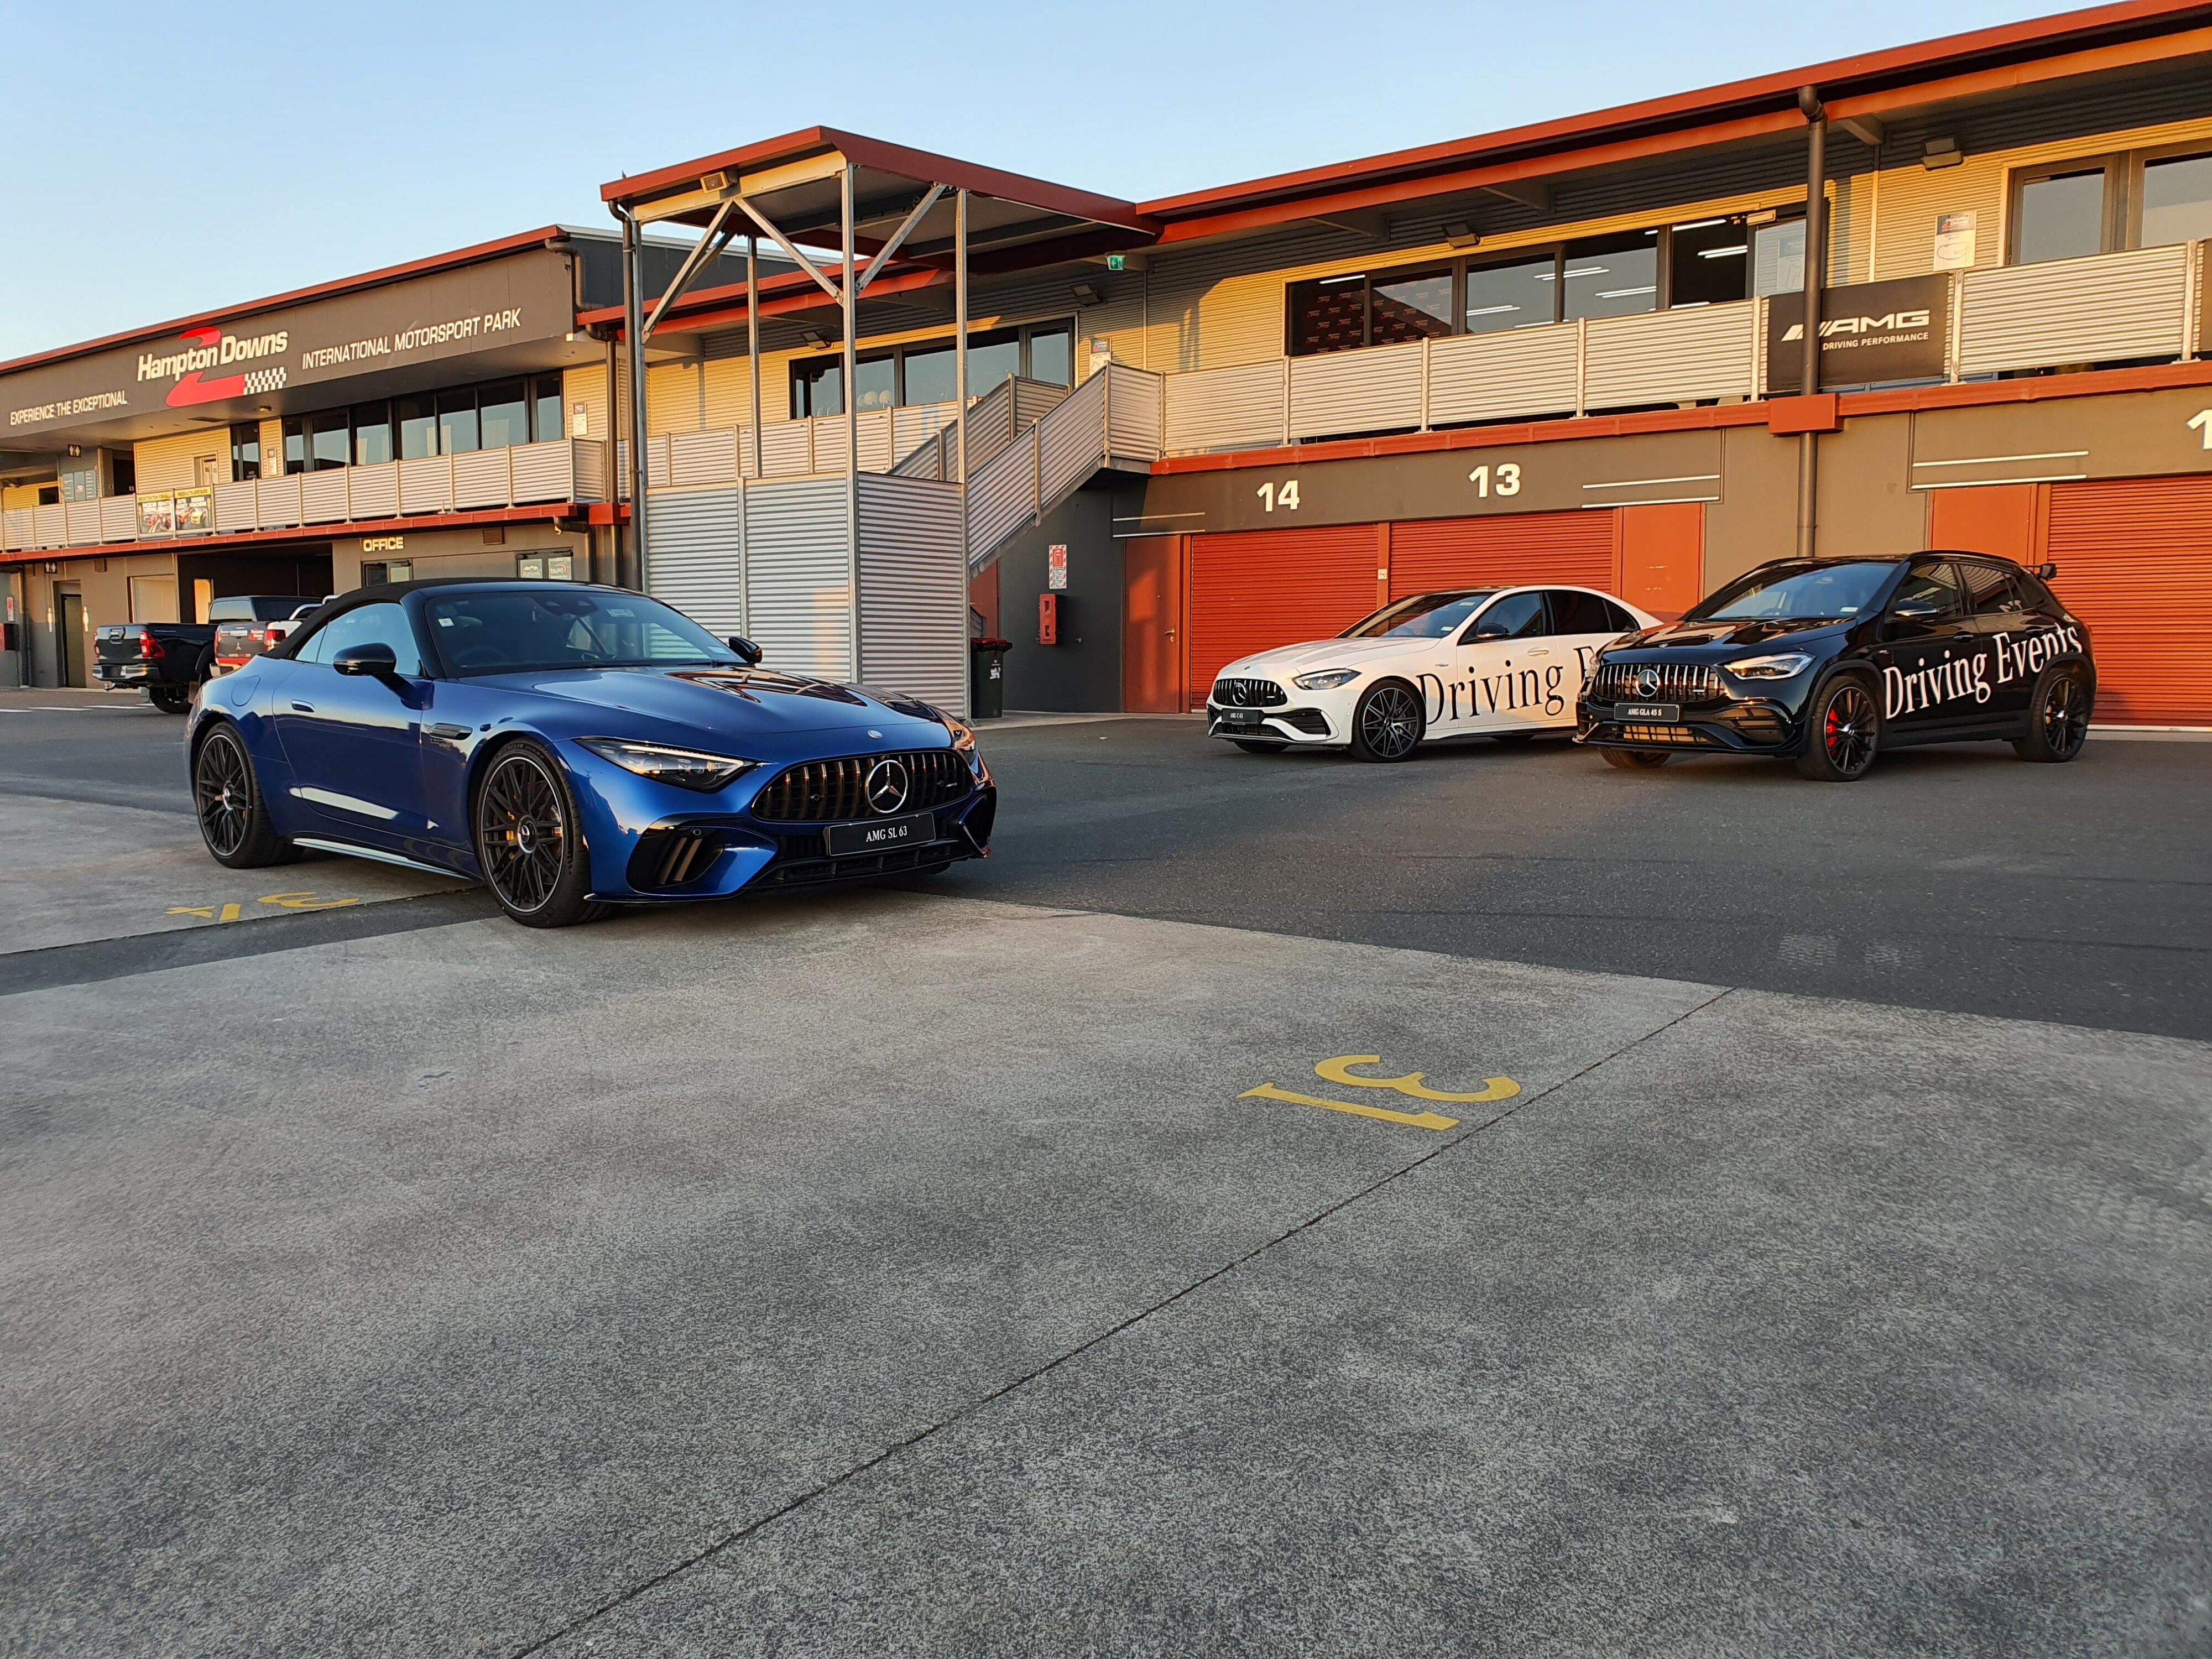 A range of Mercedes-AMG cars in frame including an SL63S AMG, C43 AMG and GLA 45S AMG at Hampton Downs Motorsport Park NZ for Mercedes' Driving Events programme.